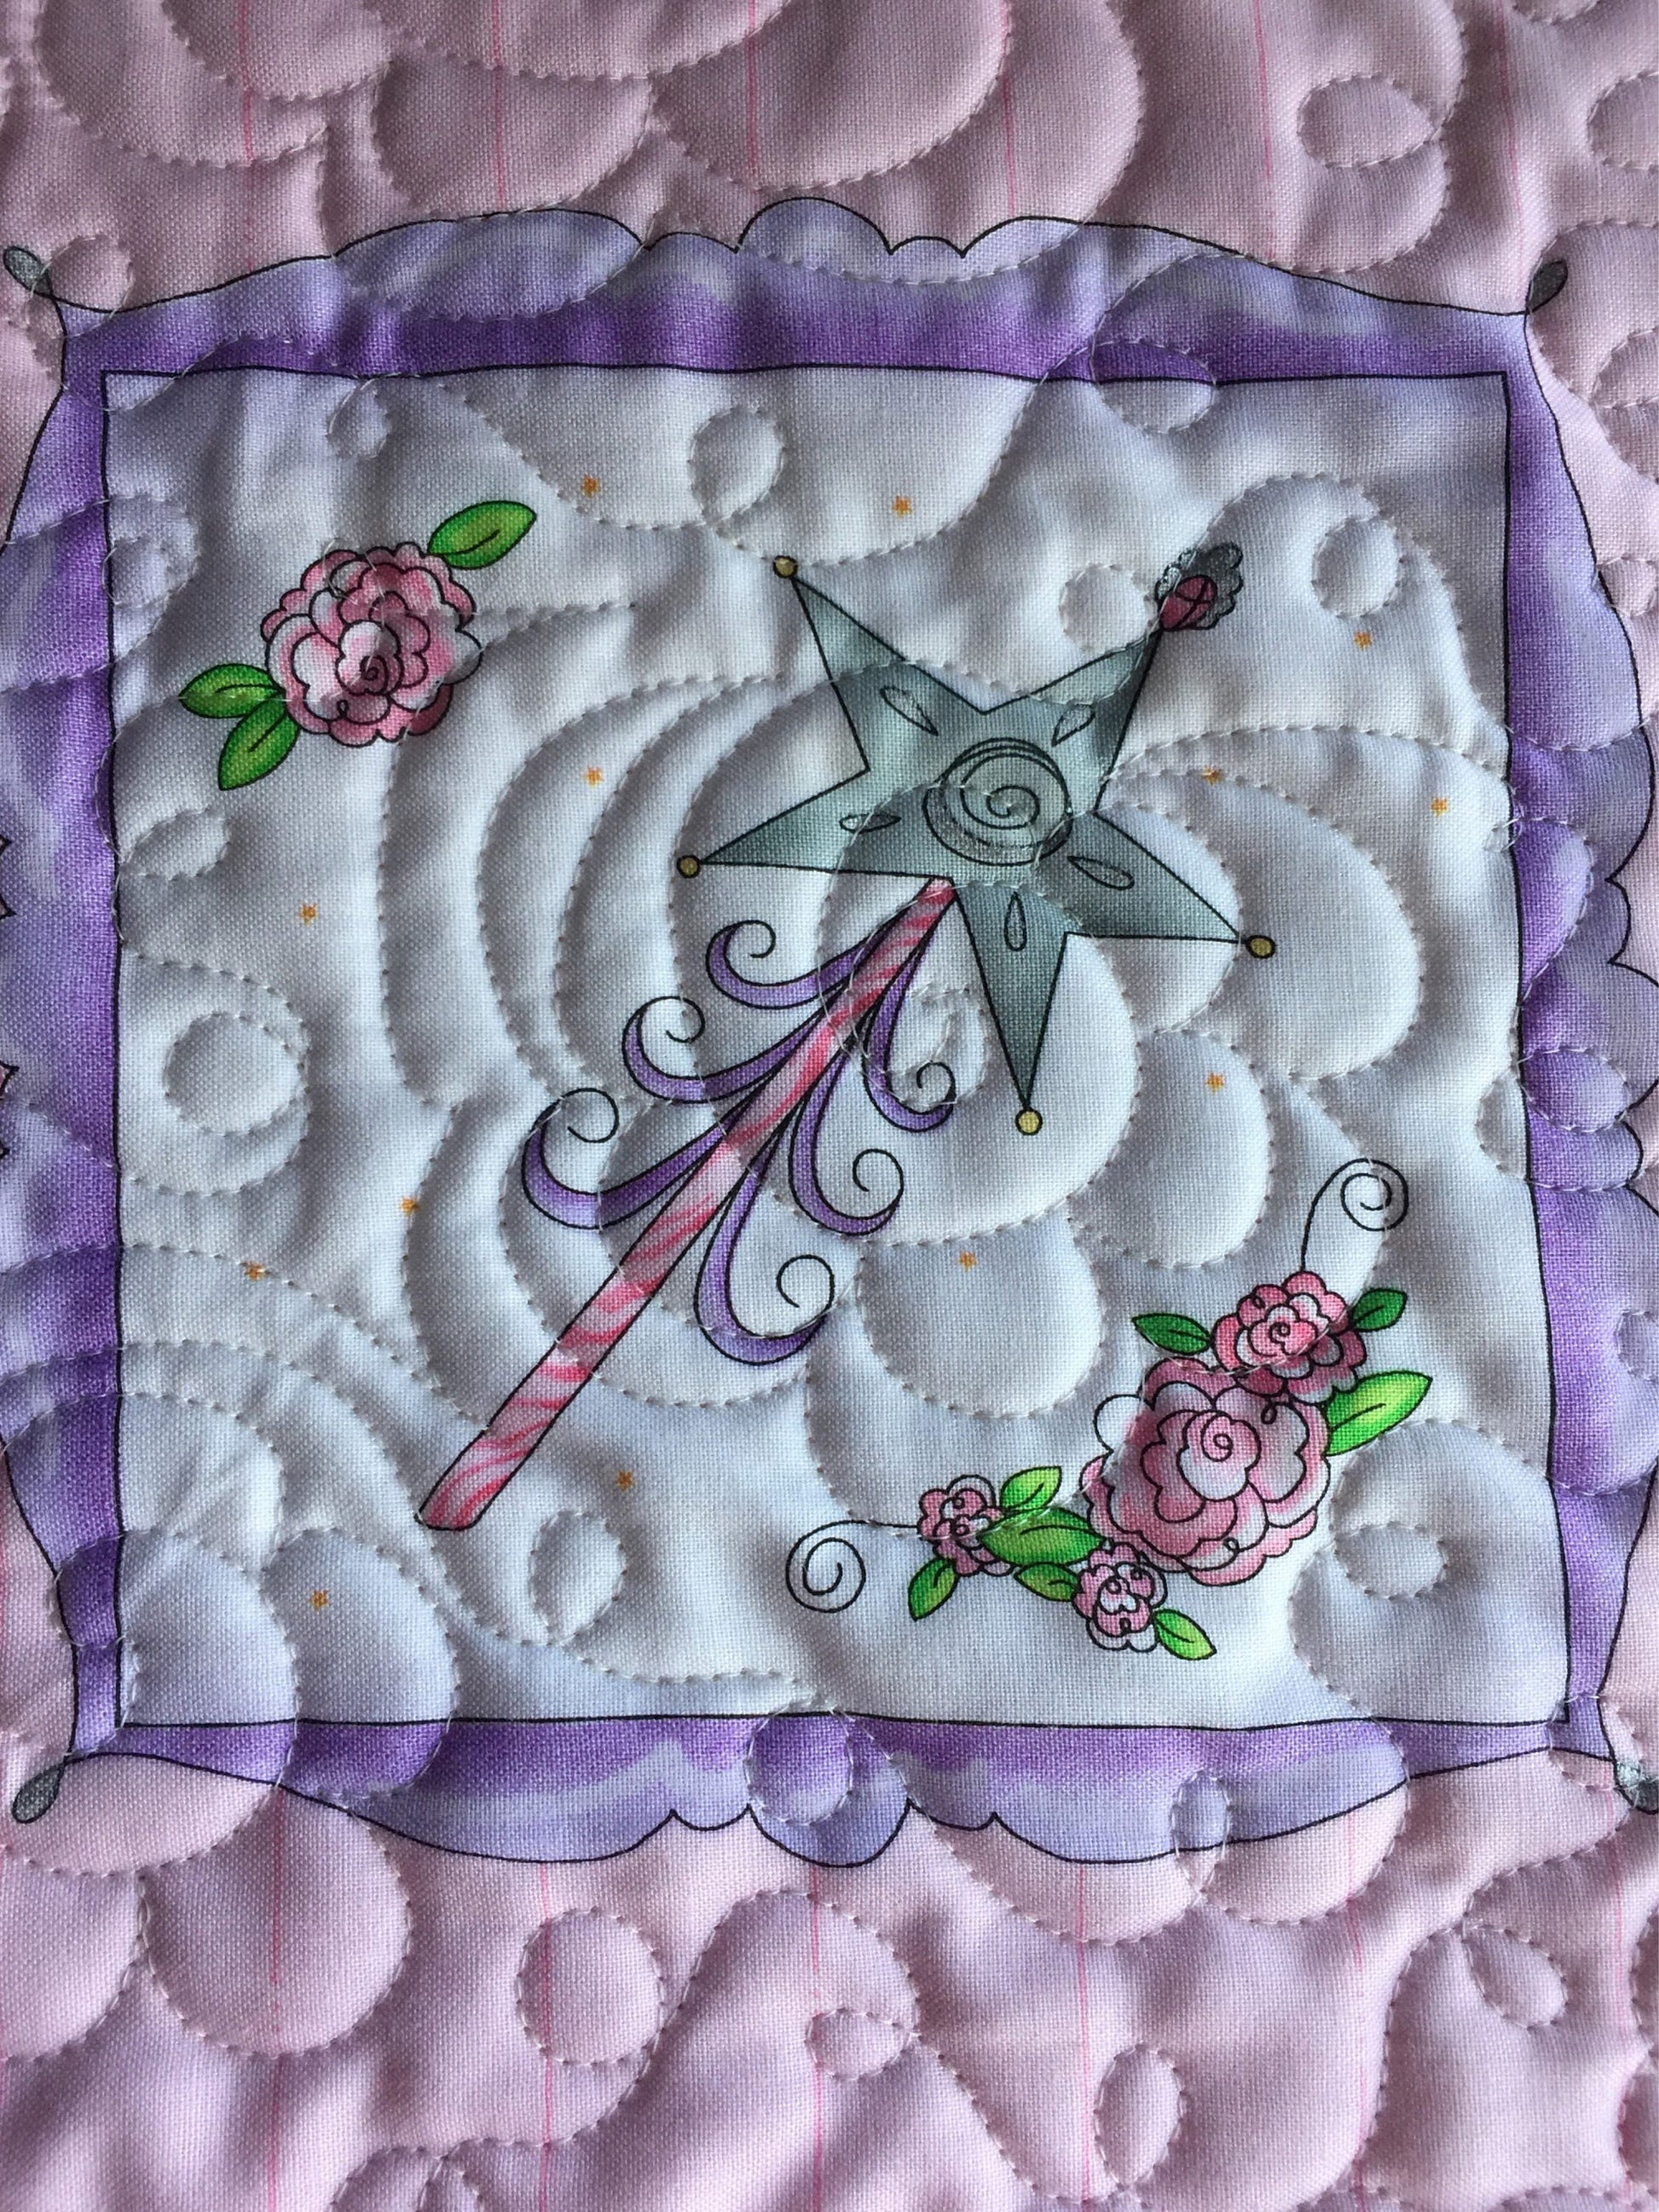 Baby Girl Princess and Fairytale Quilt